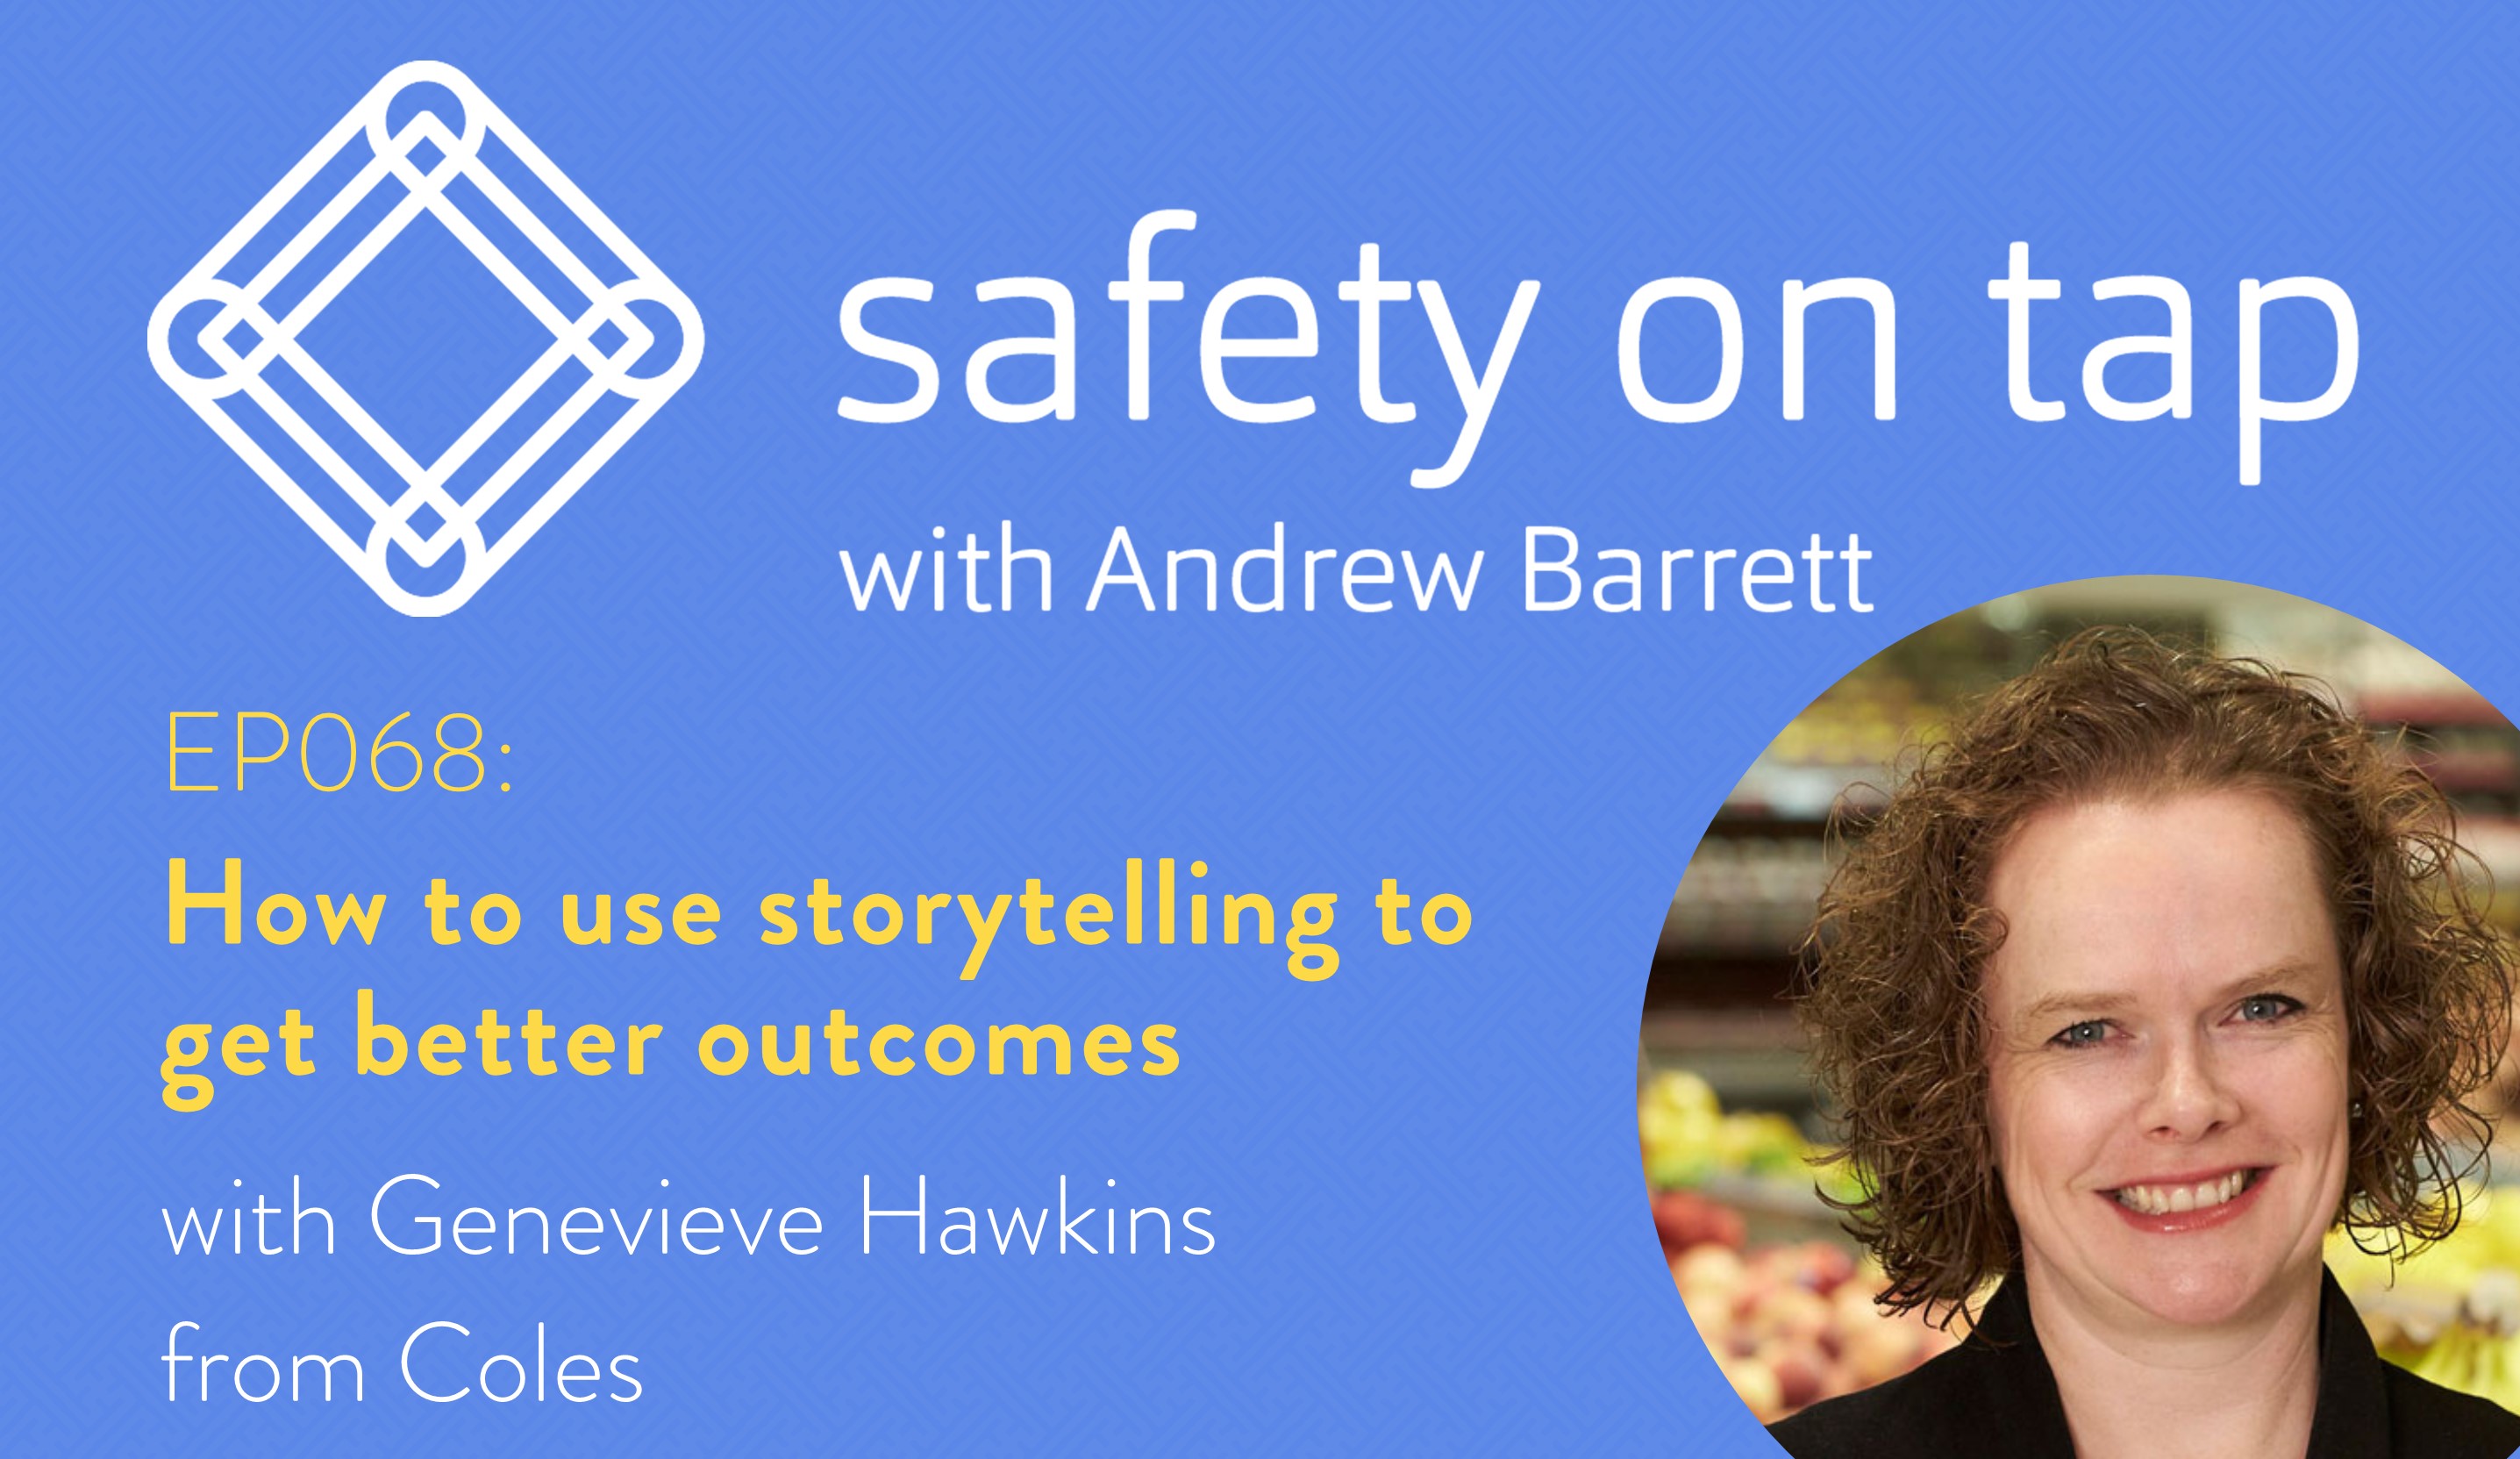 Ep068: How to use storytelling to get better outcomes, with Genevieve Hawkins